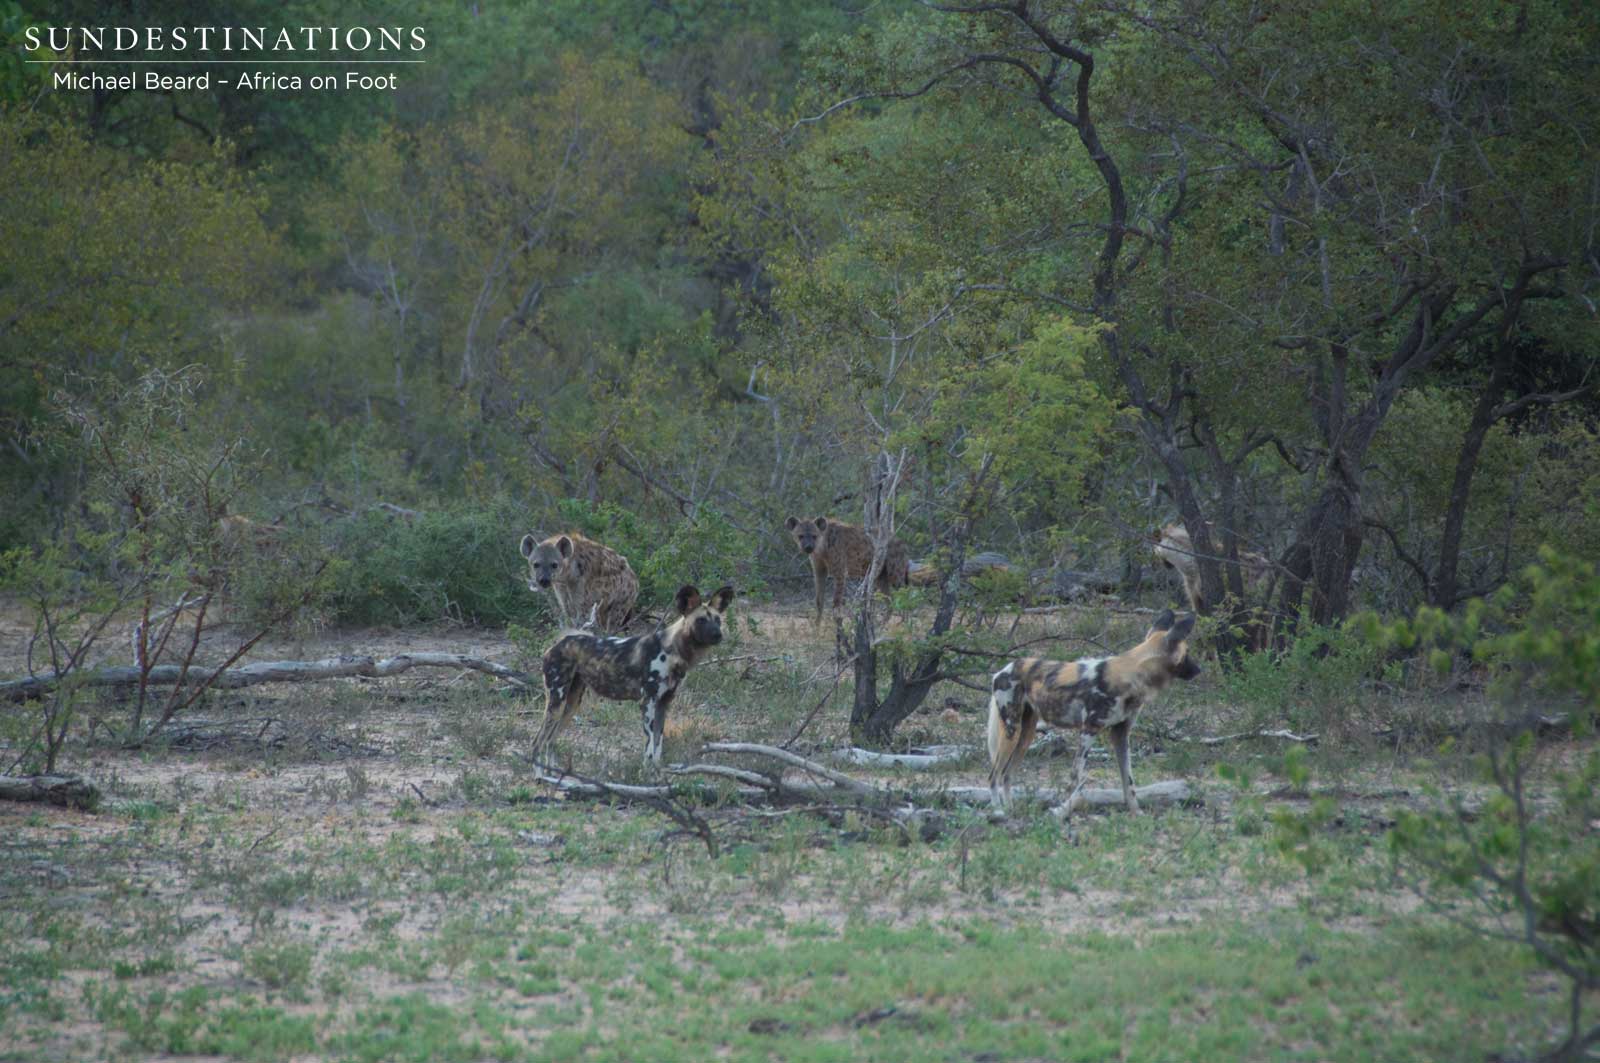 Wild dogs and hyenas approaching lion kill